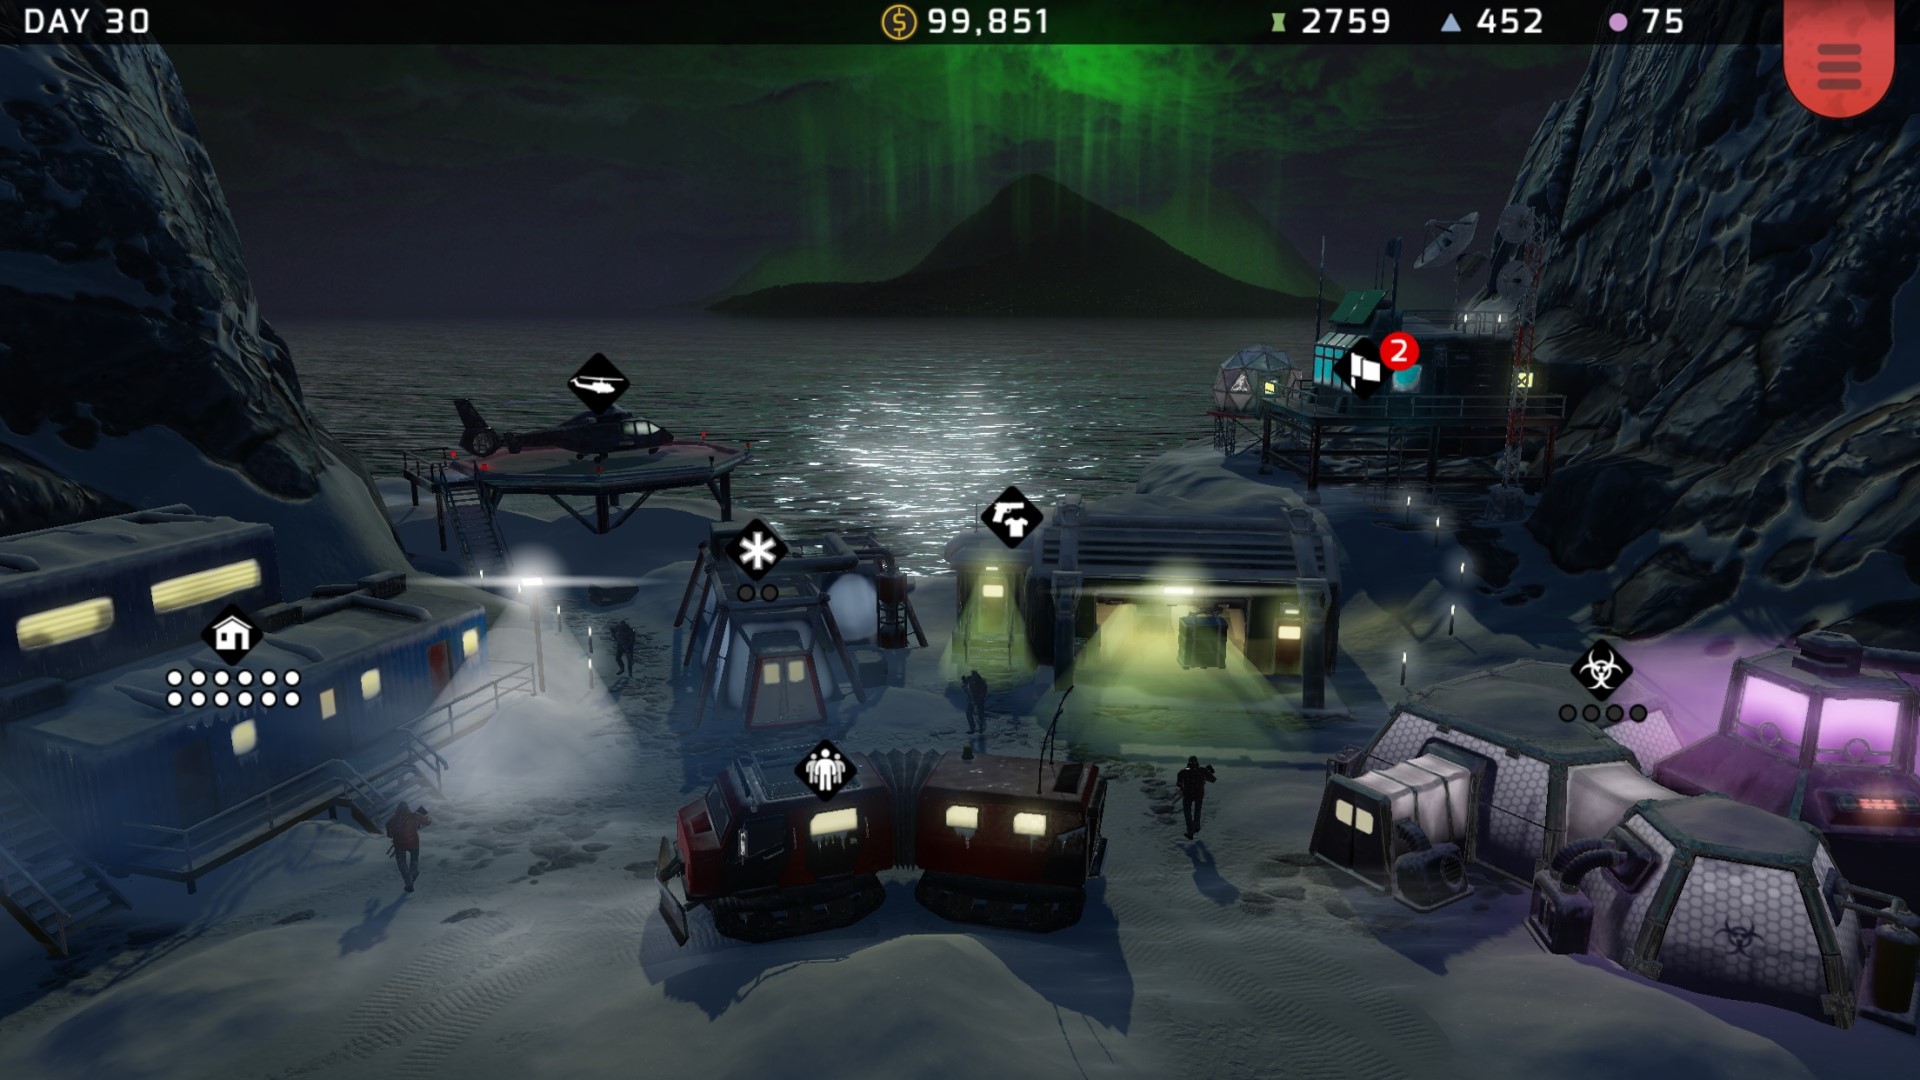 Best mobile strategy games: Xenowerk Tactics. Image shows a selection of military vehicles sitting beside the ocean at night.